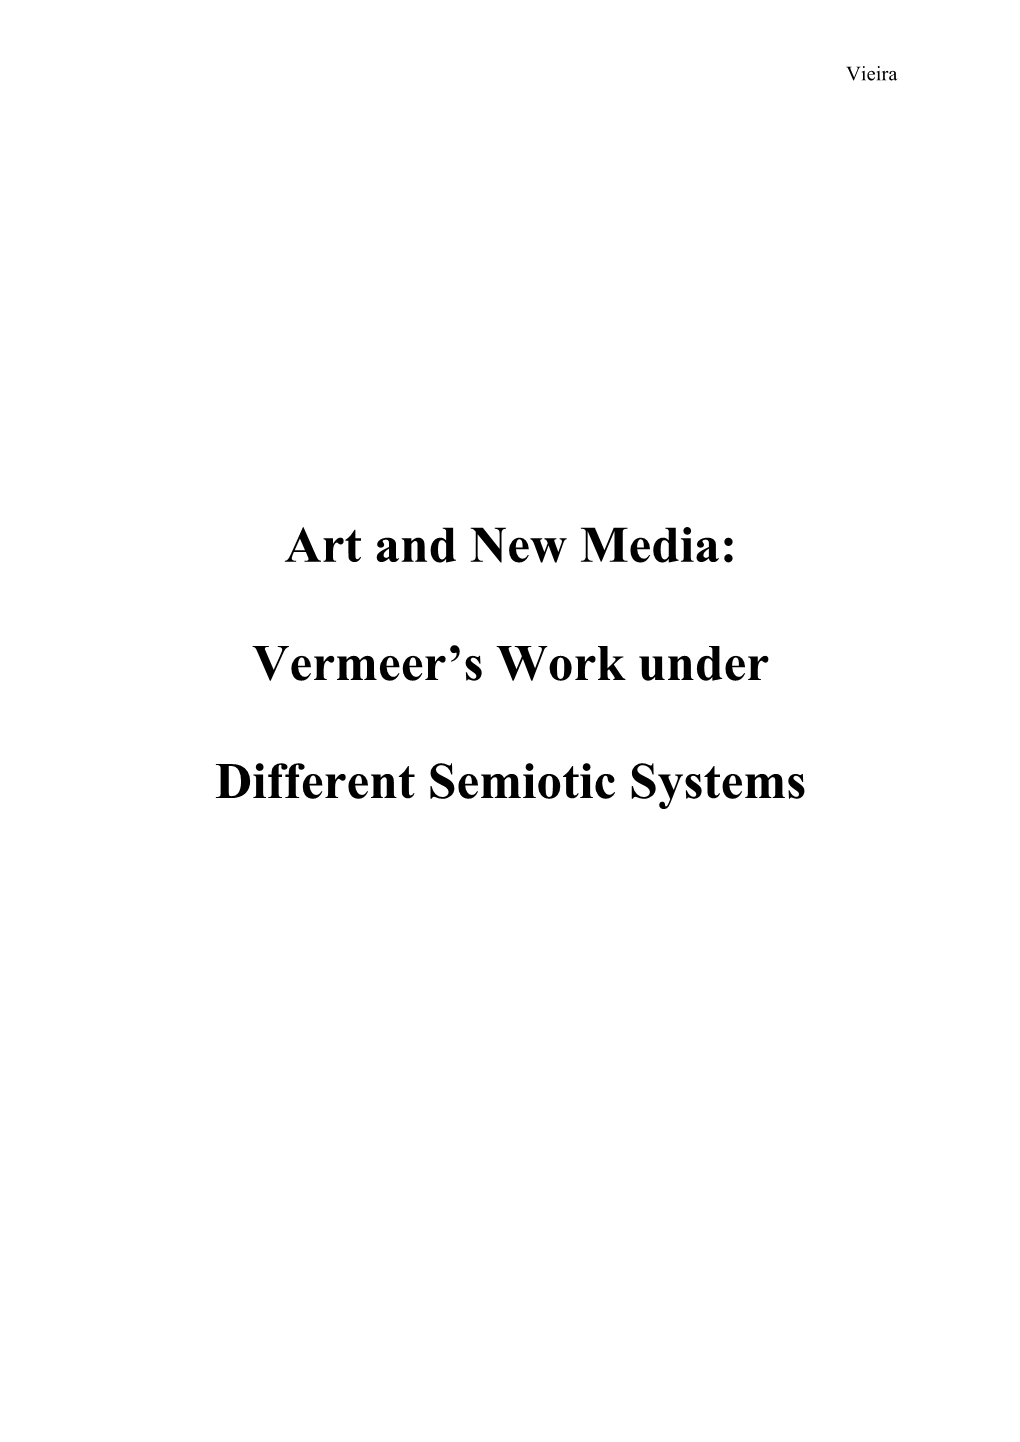 Art and New Media: Vermeer's Work Under Different